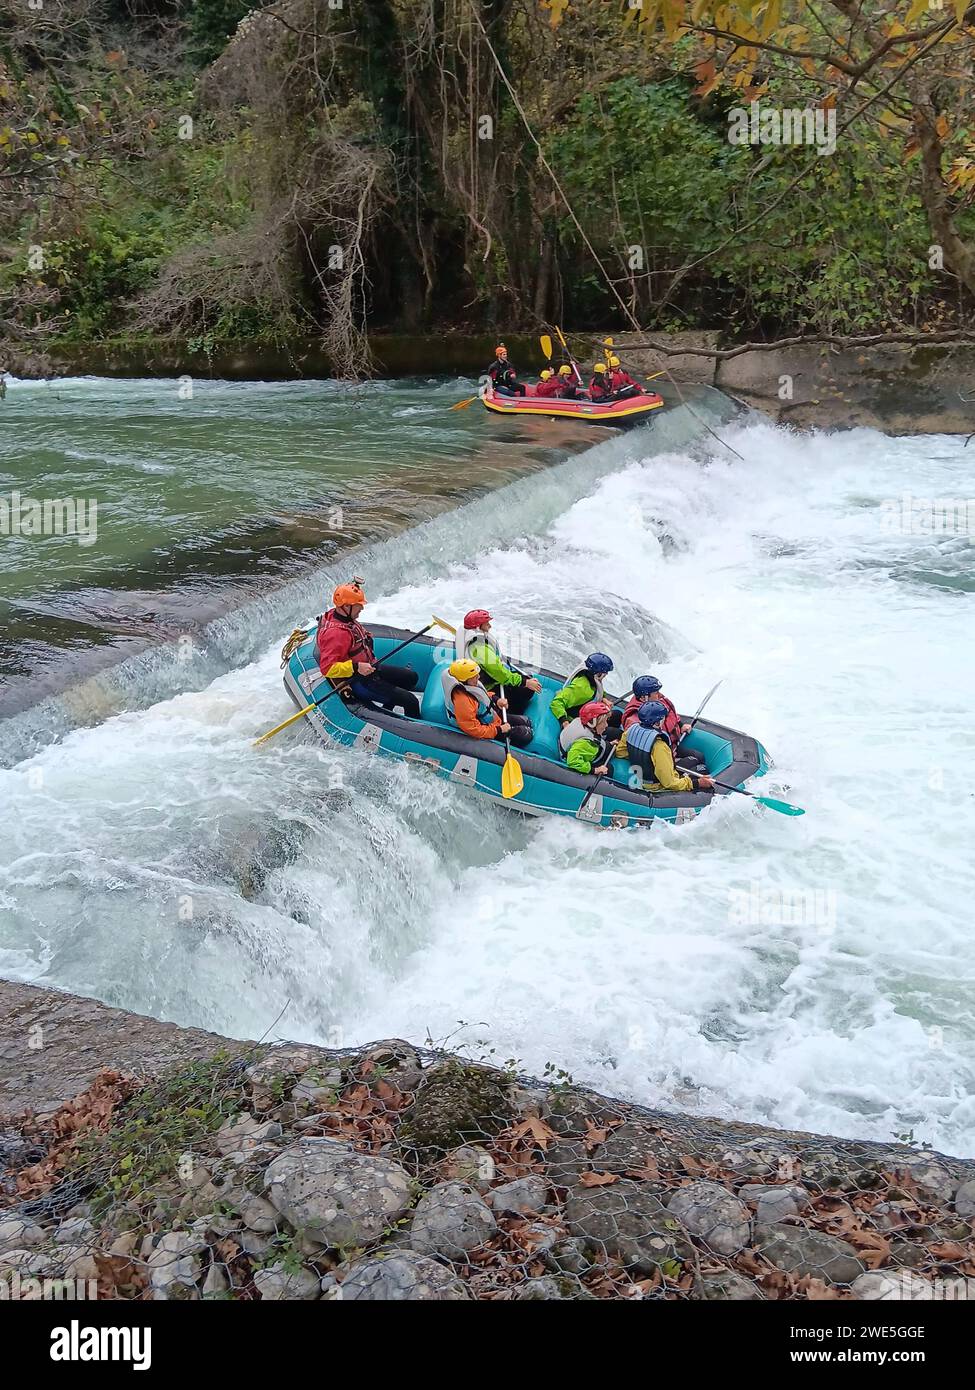 rafting on a mountain river Stock Photo